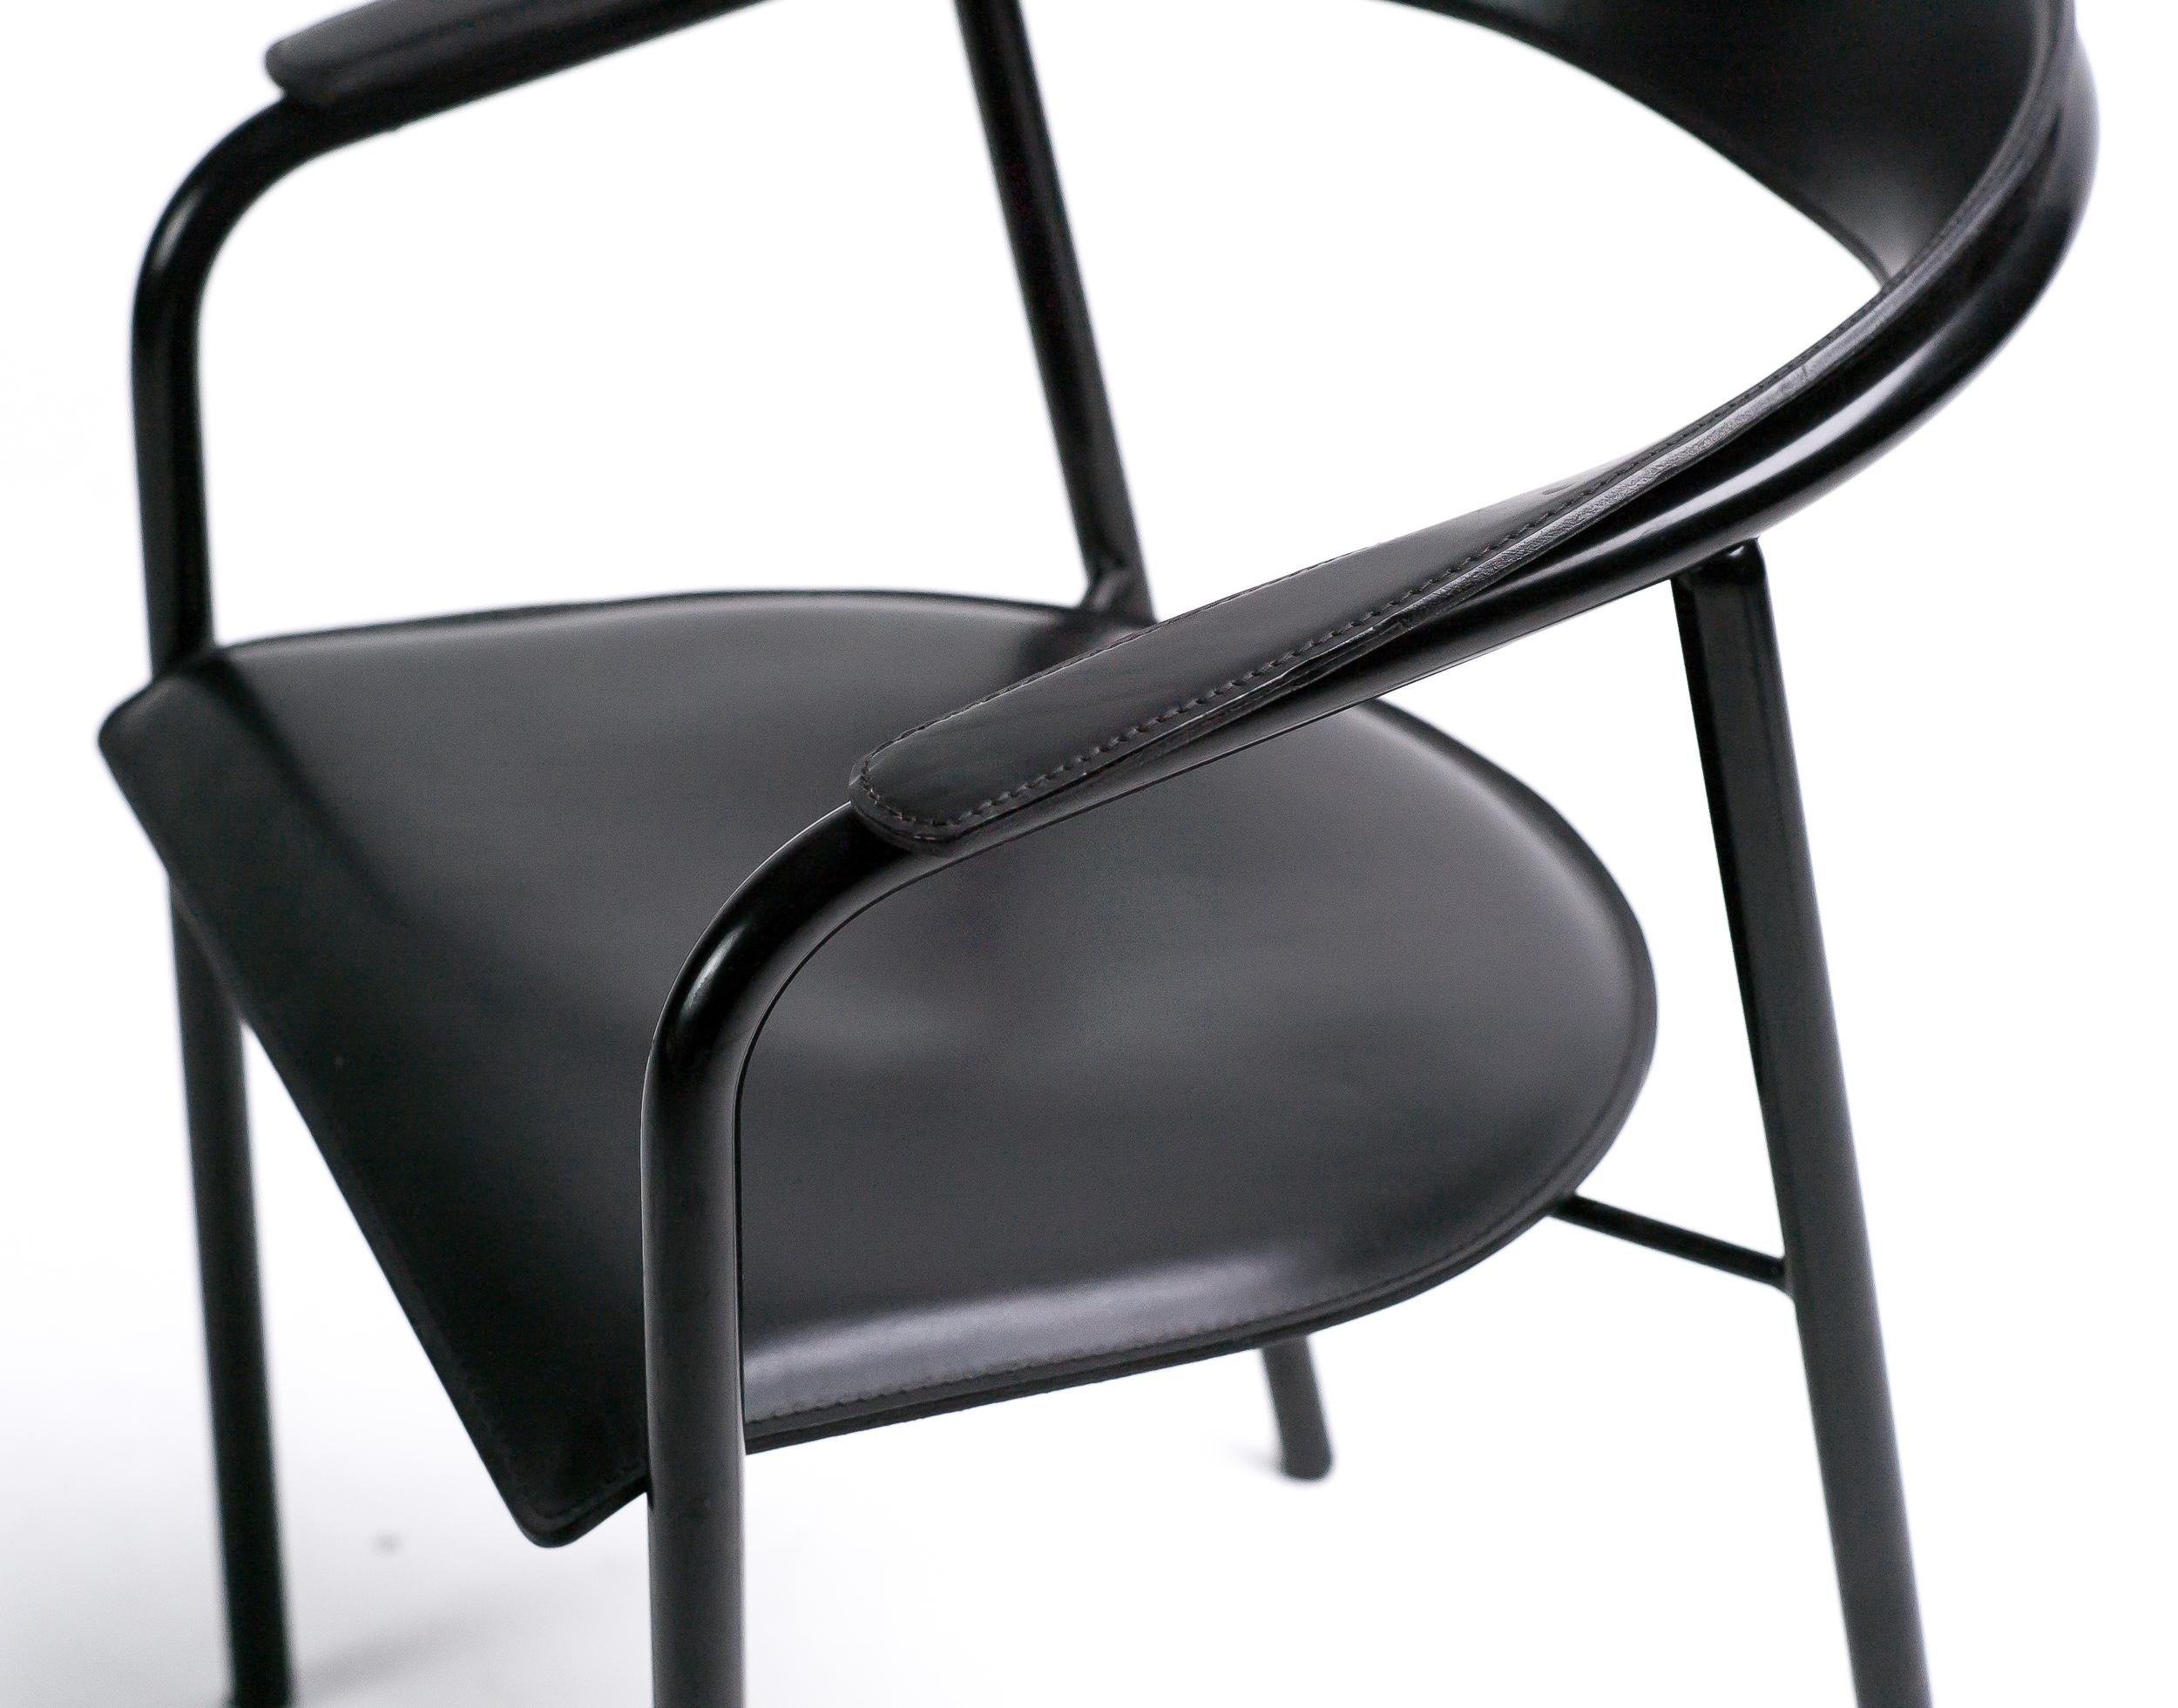 These slope-backed armchairs were made by Arrben, Italy in the 1980s.
The tubular frames are black enameled, the black saddle leather seat and curved back have a decorative stitching detail. The chairs are sturdy yet very elegant.
Each chair is